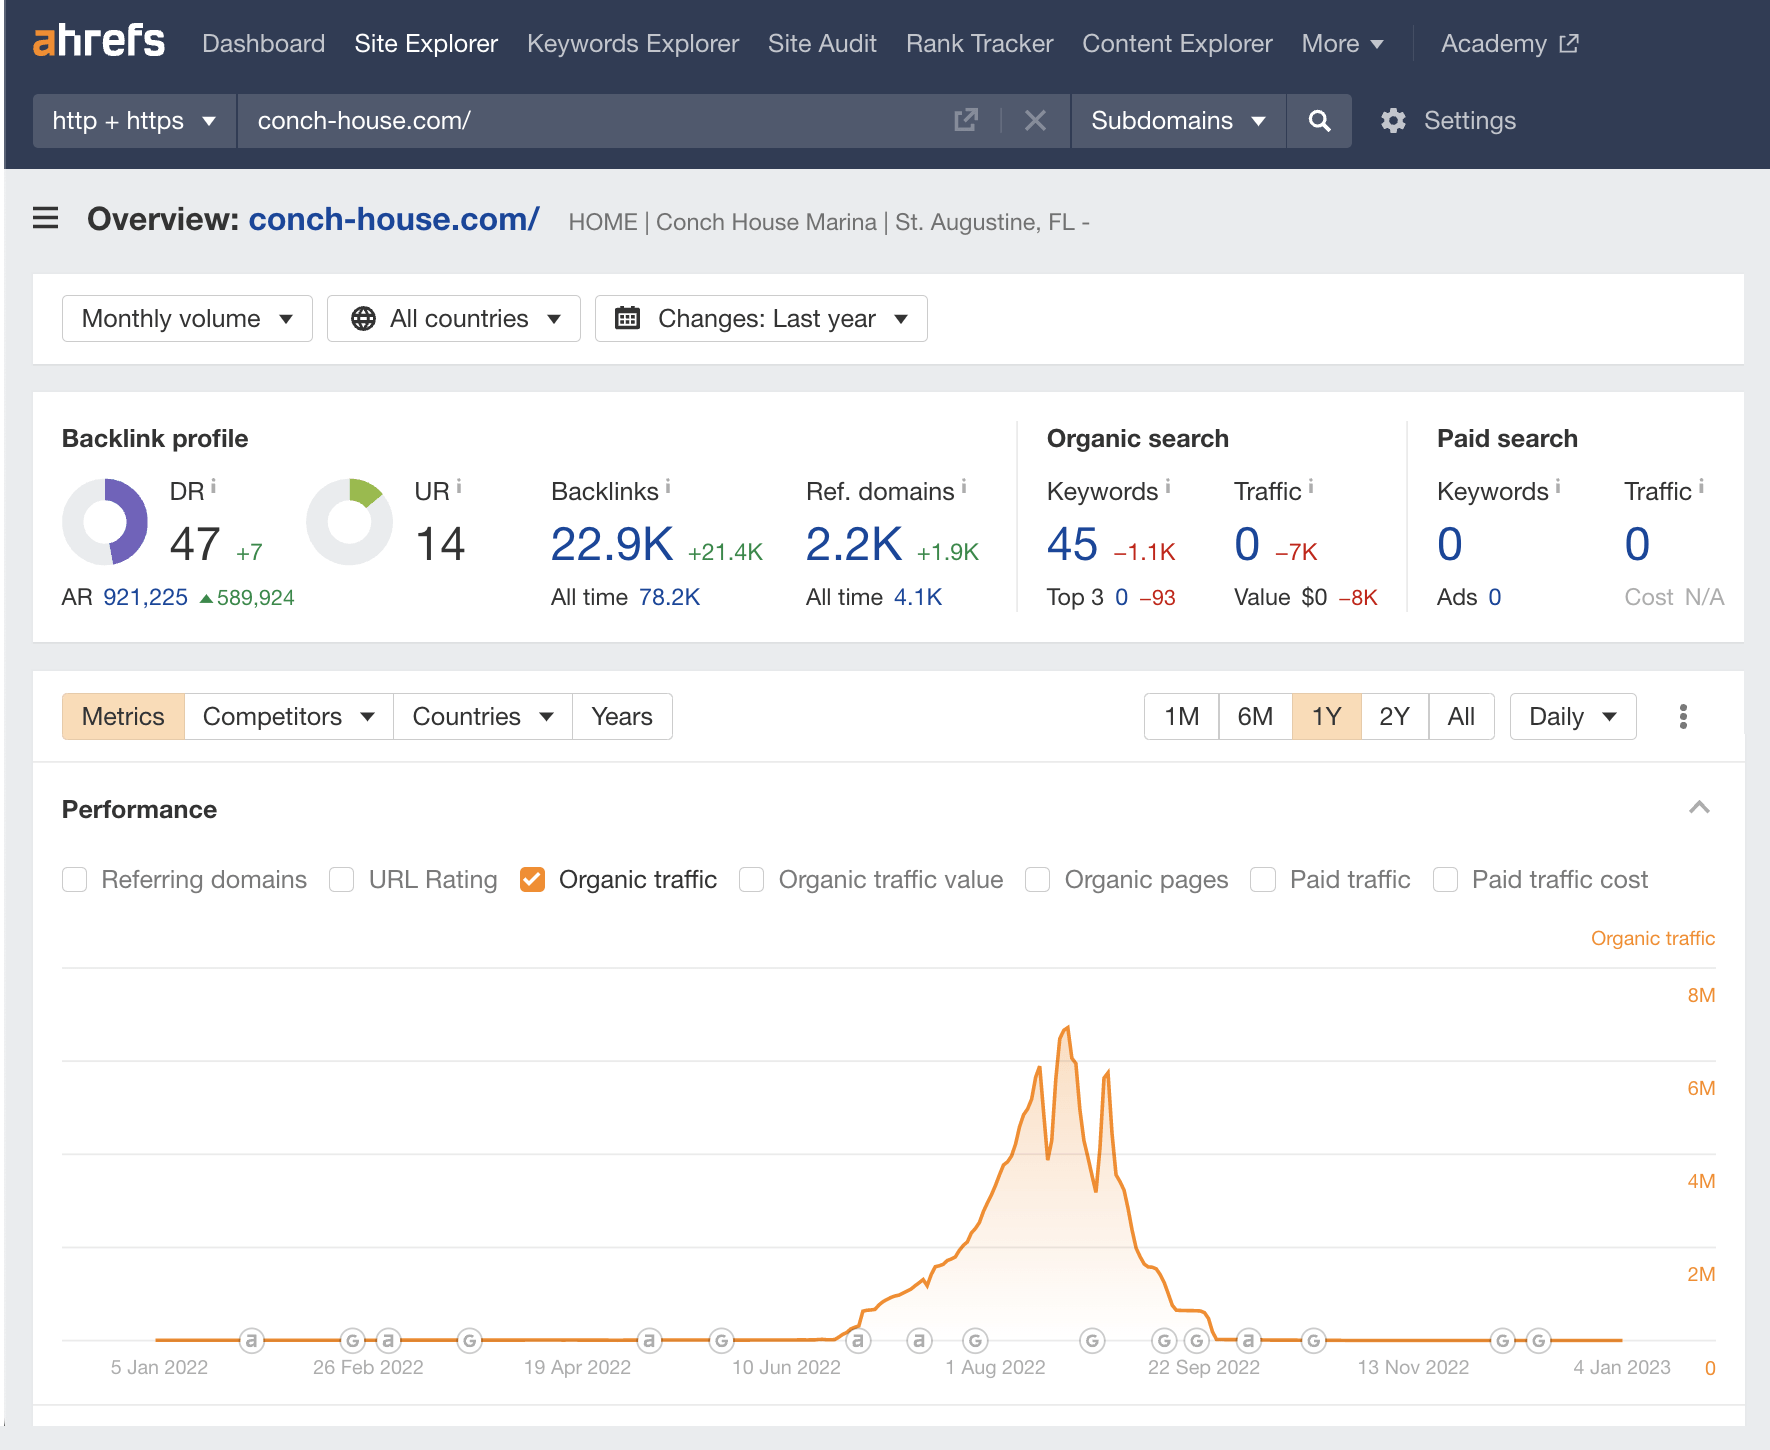 Drastic traffic drop after a likely Google penalty, via Ahrefs' Site Explorer